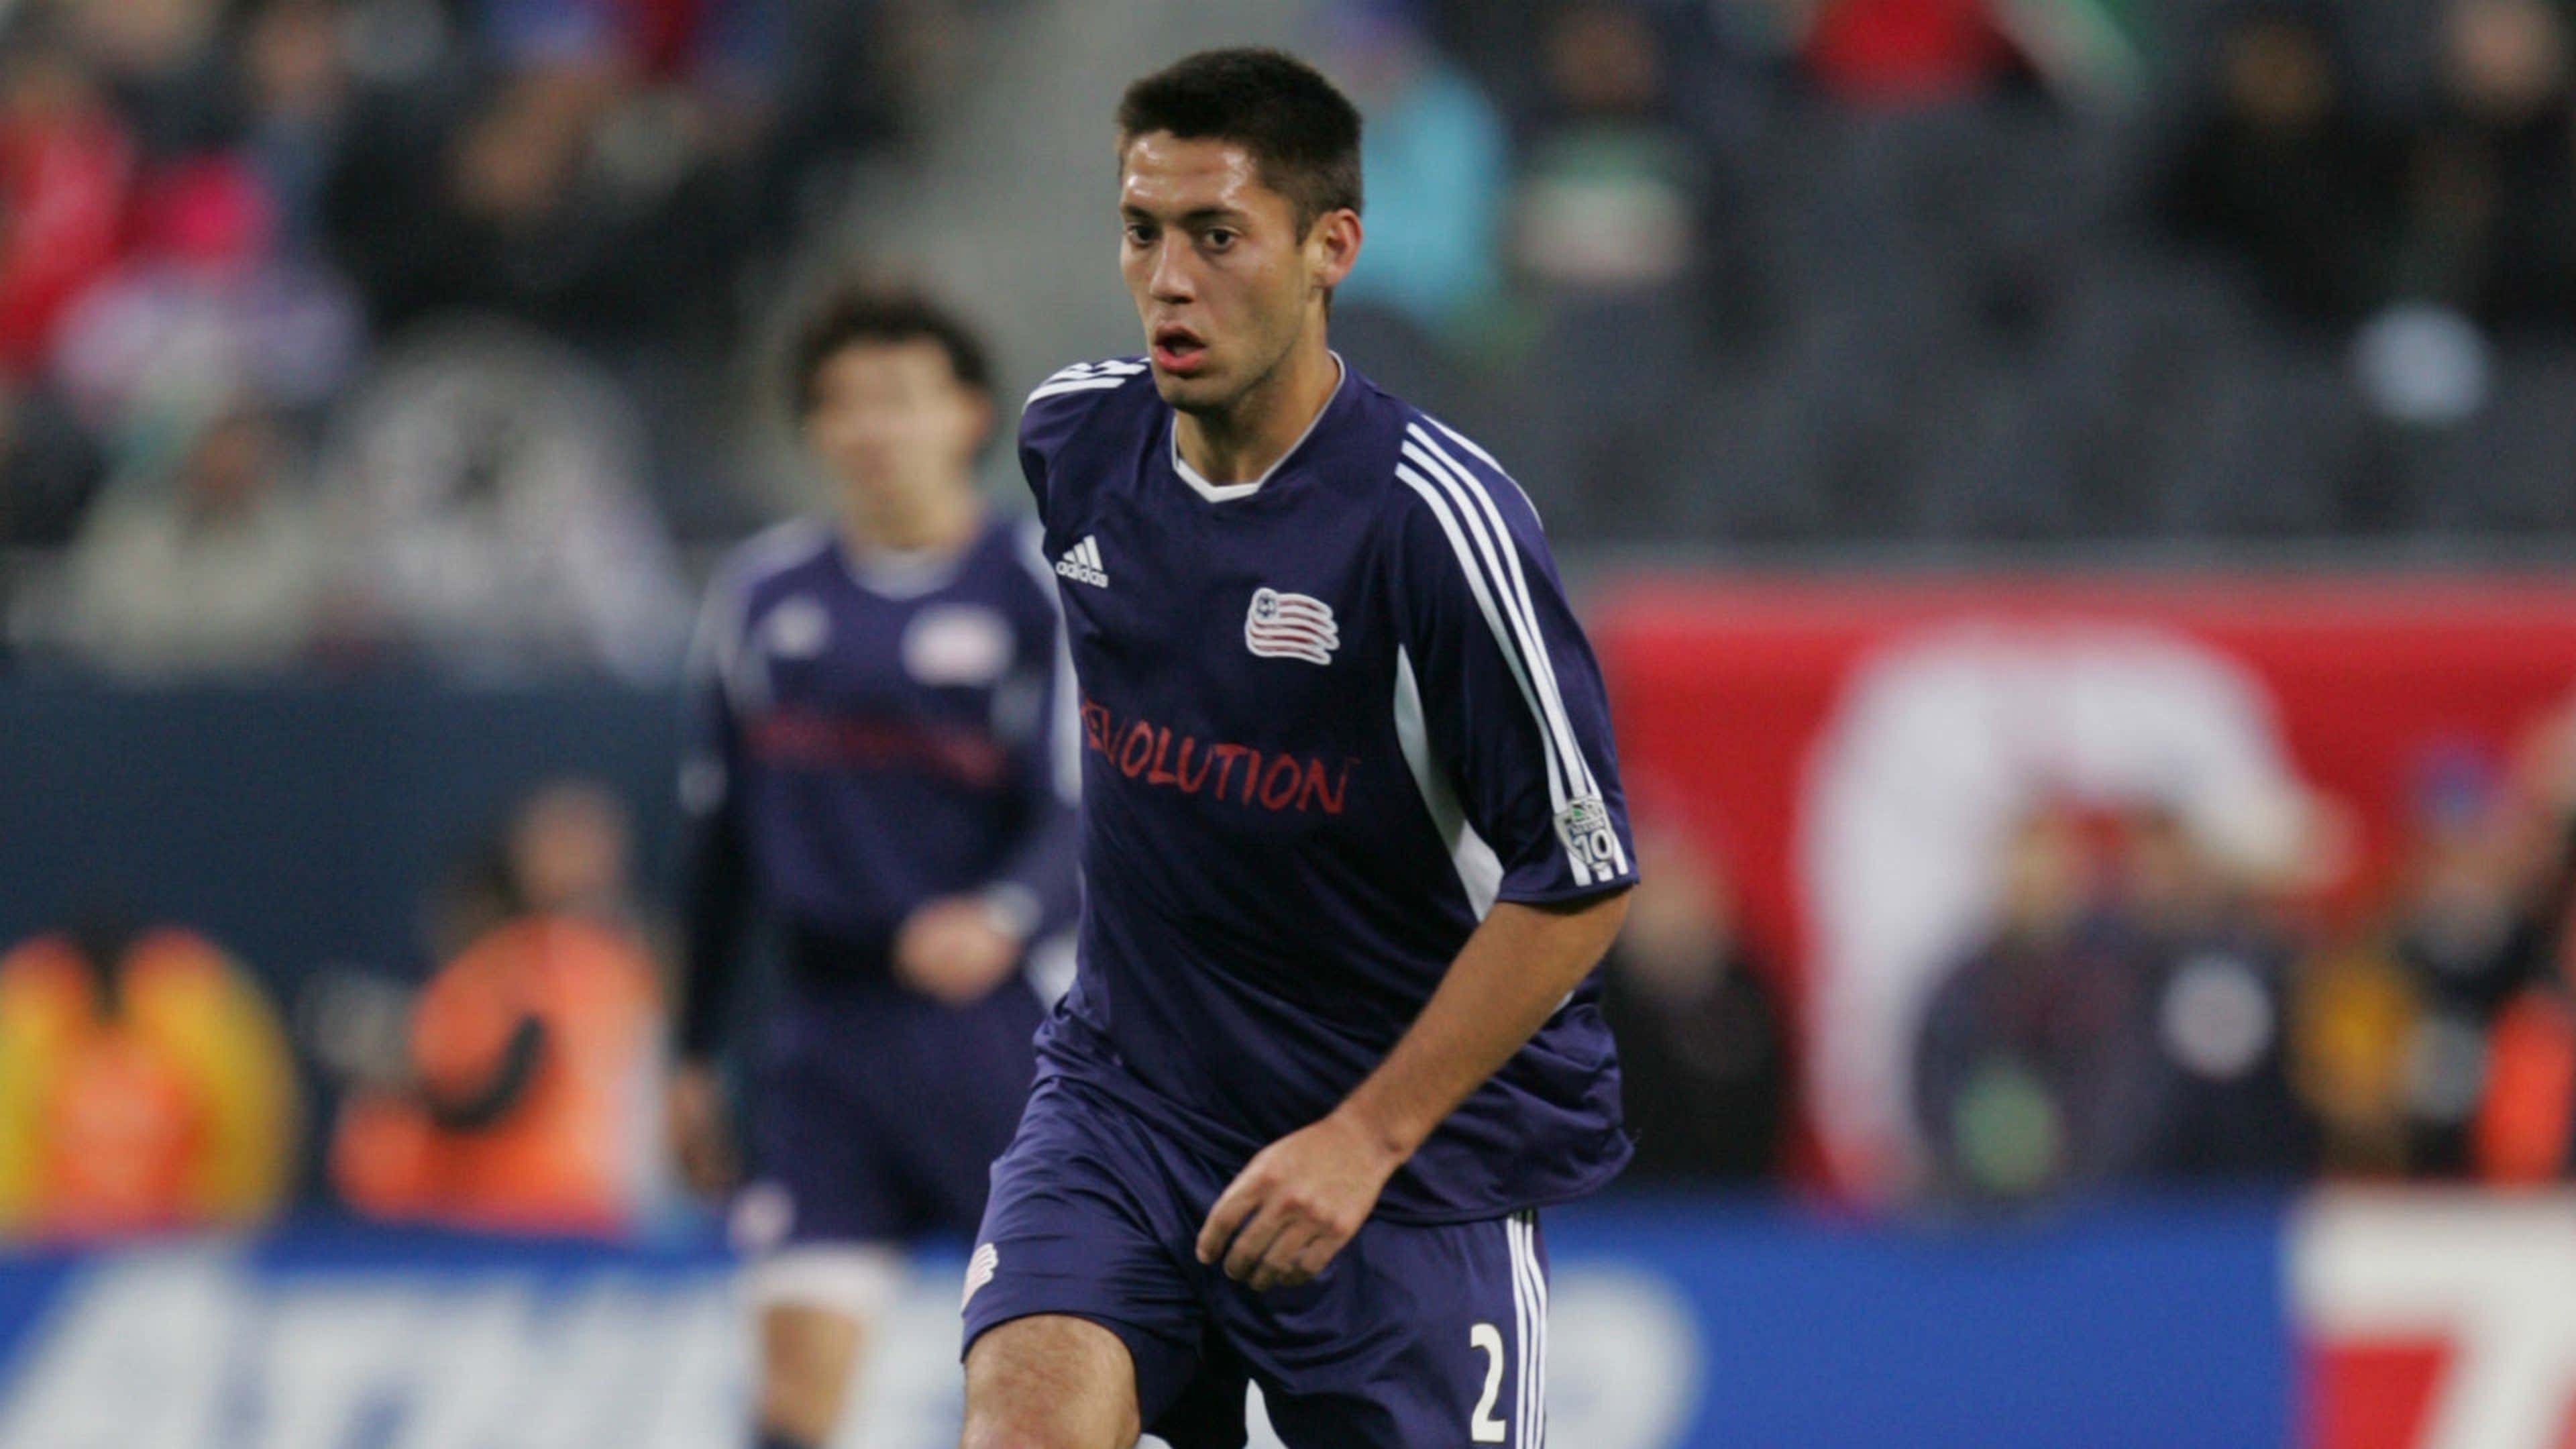 Major League Soccer: Clint Dempsey's rags to riches story